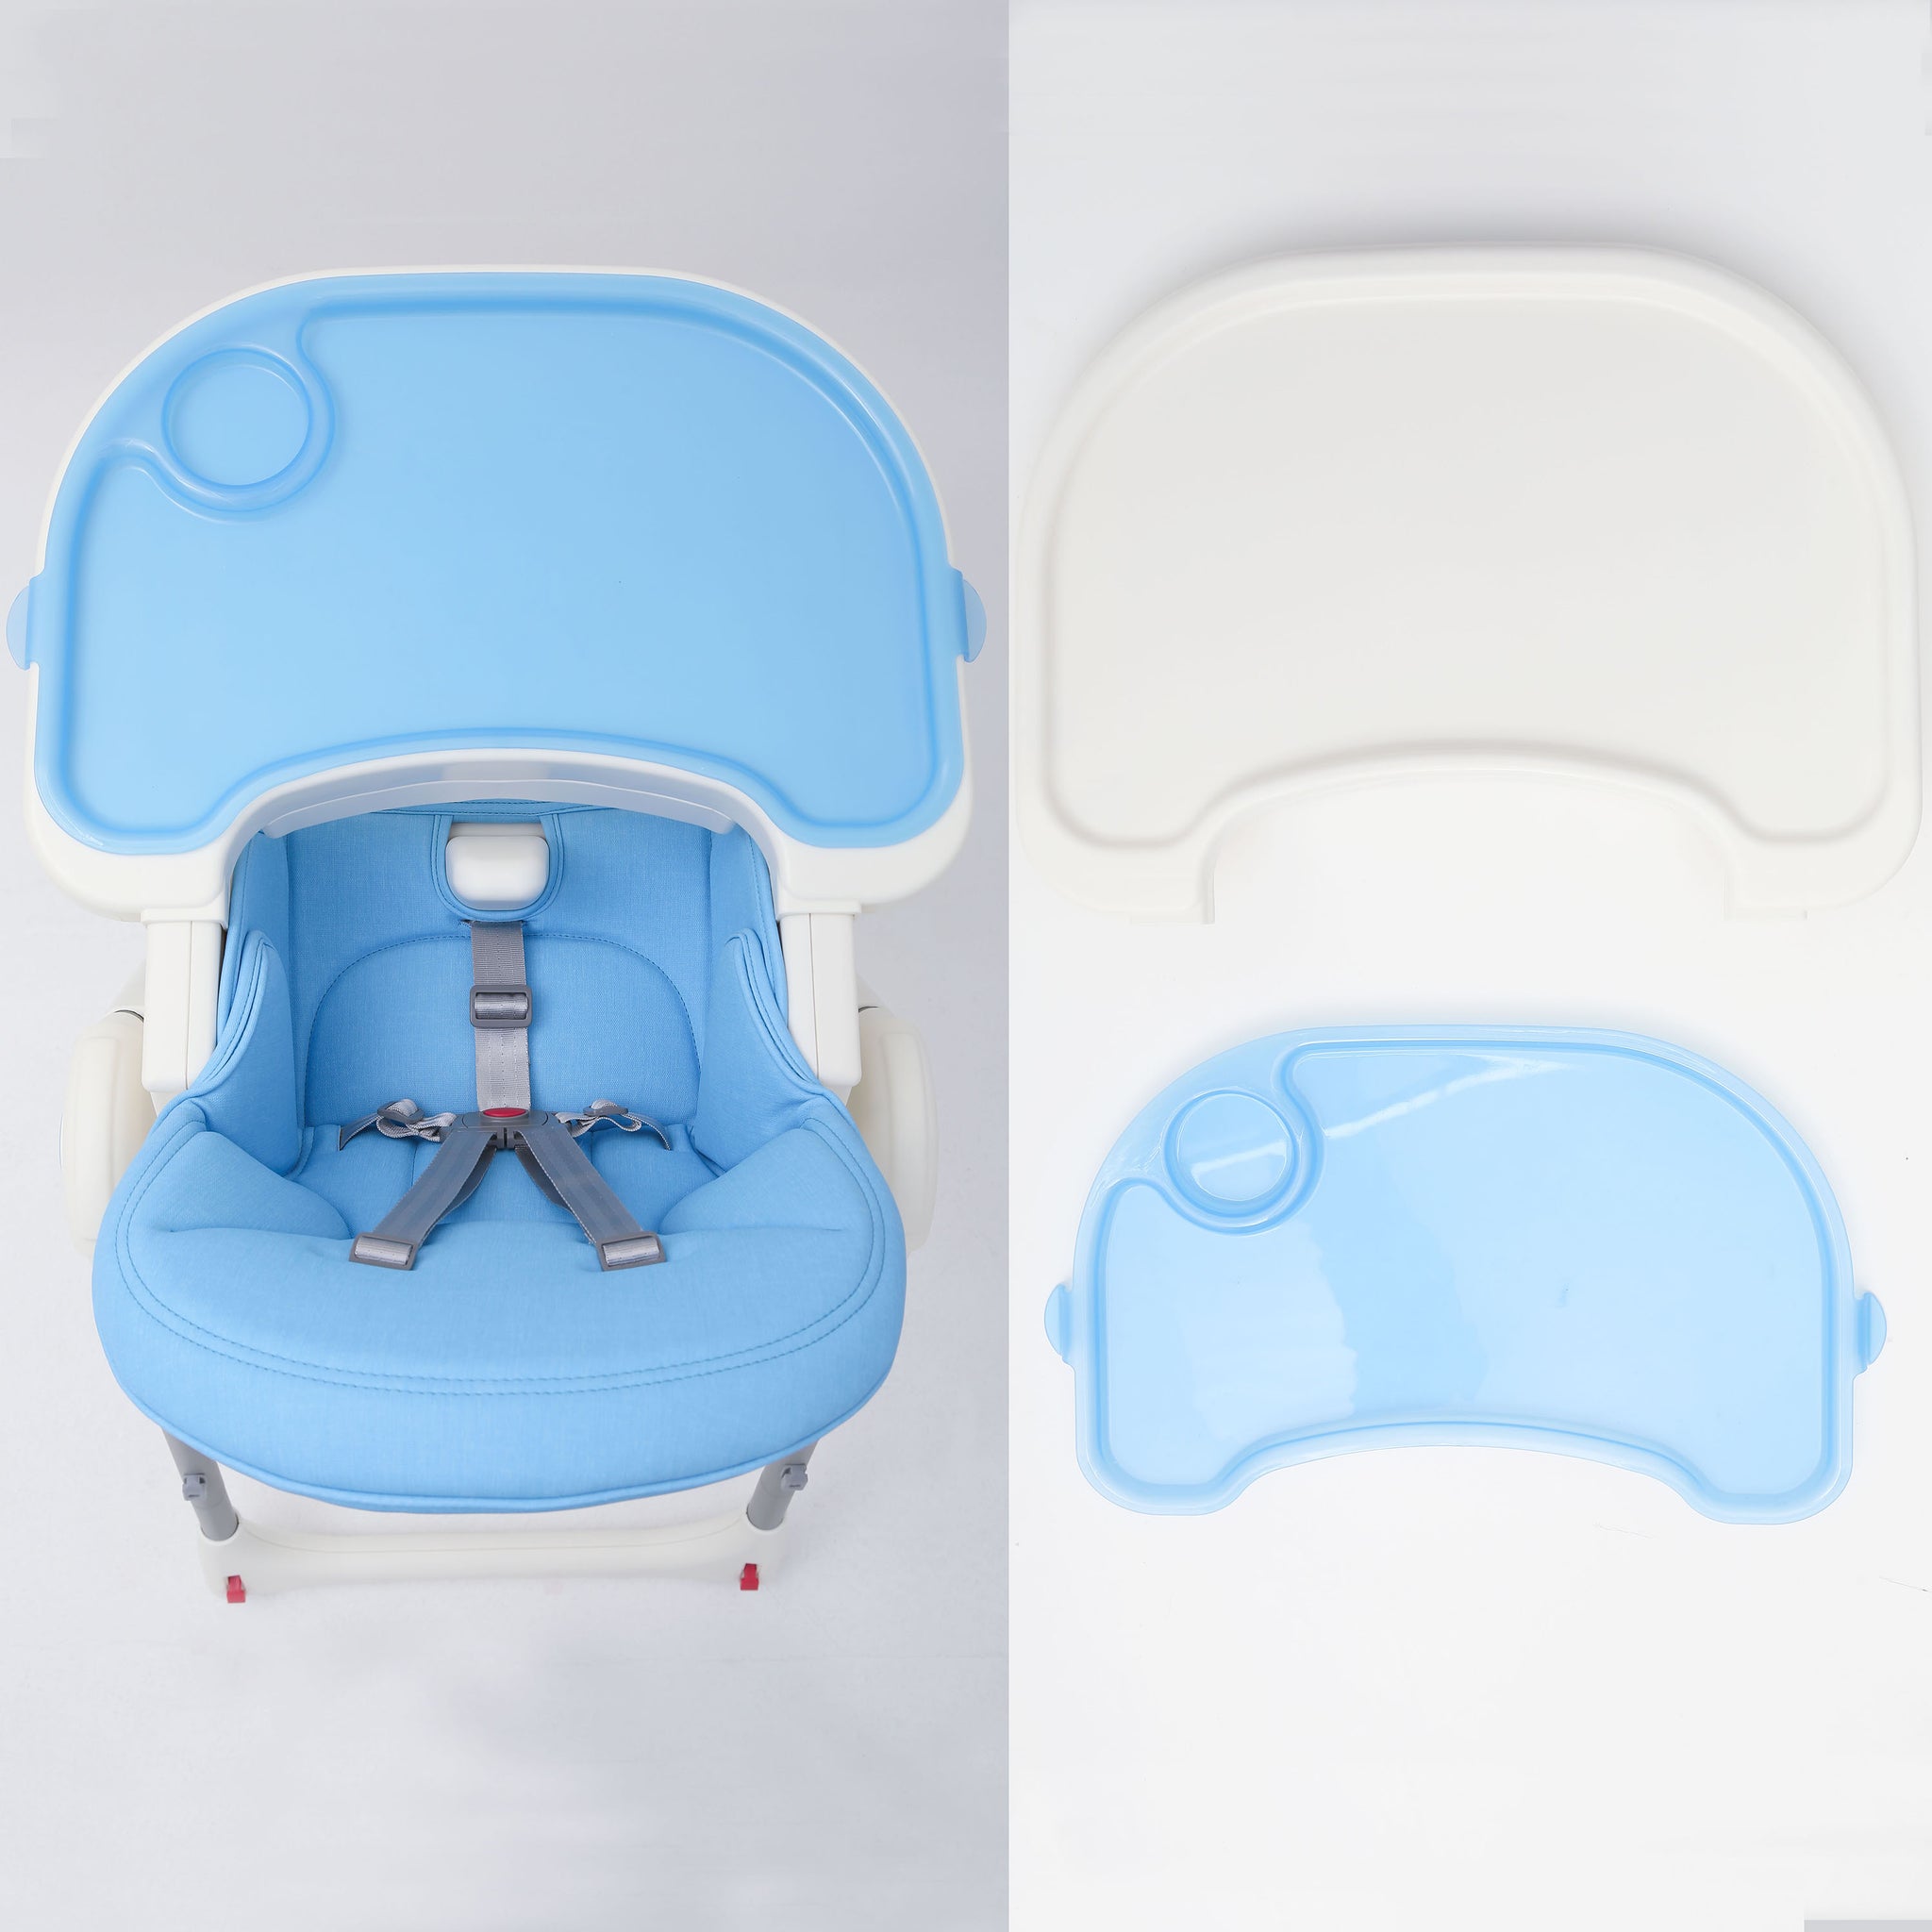 BABY CARE High Chair _ Blue